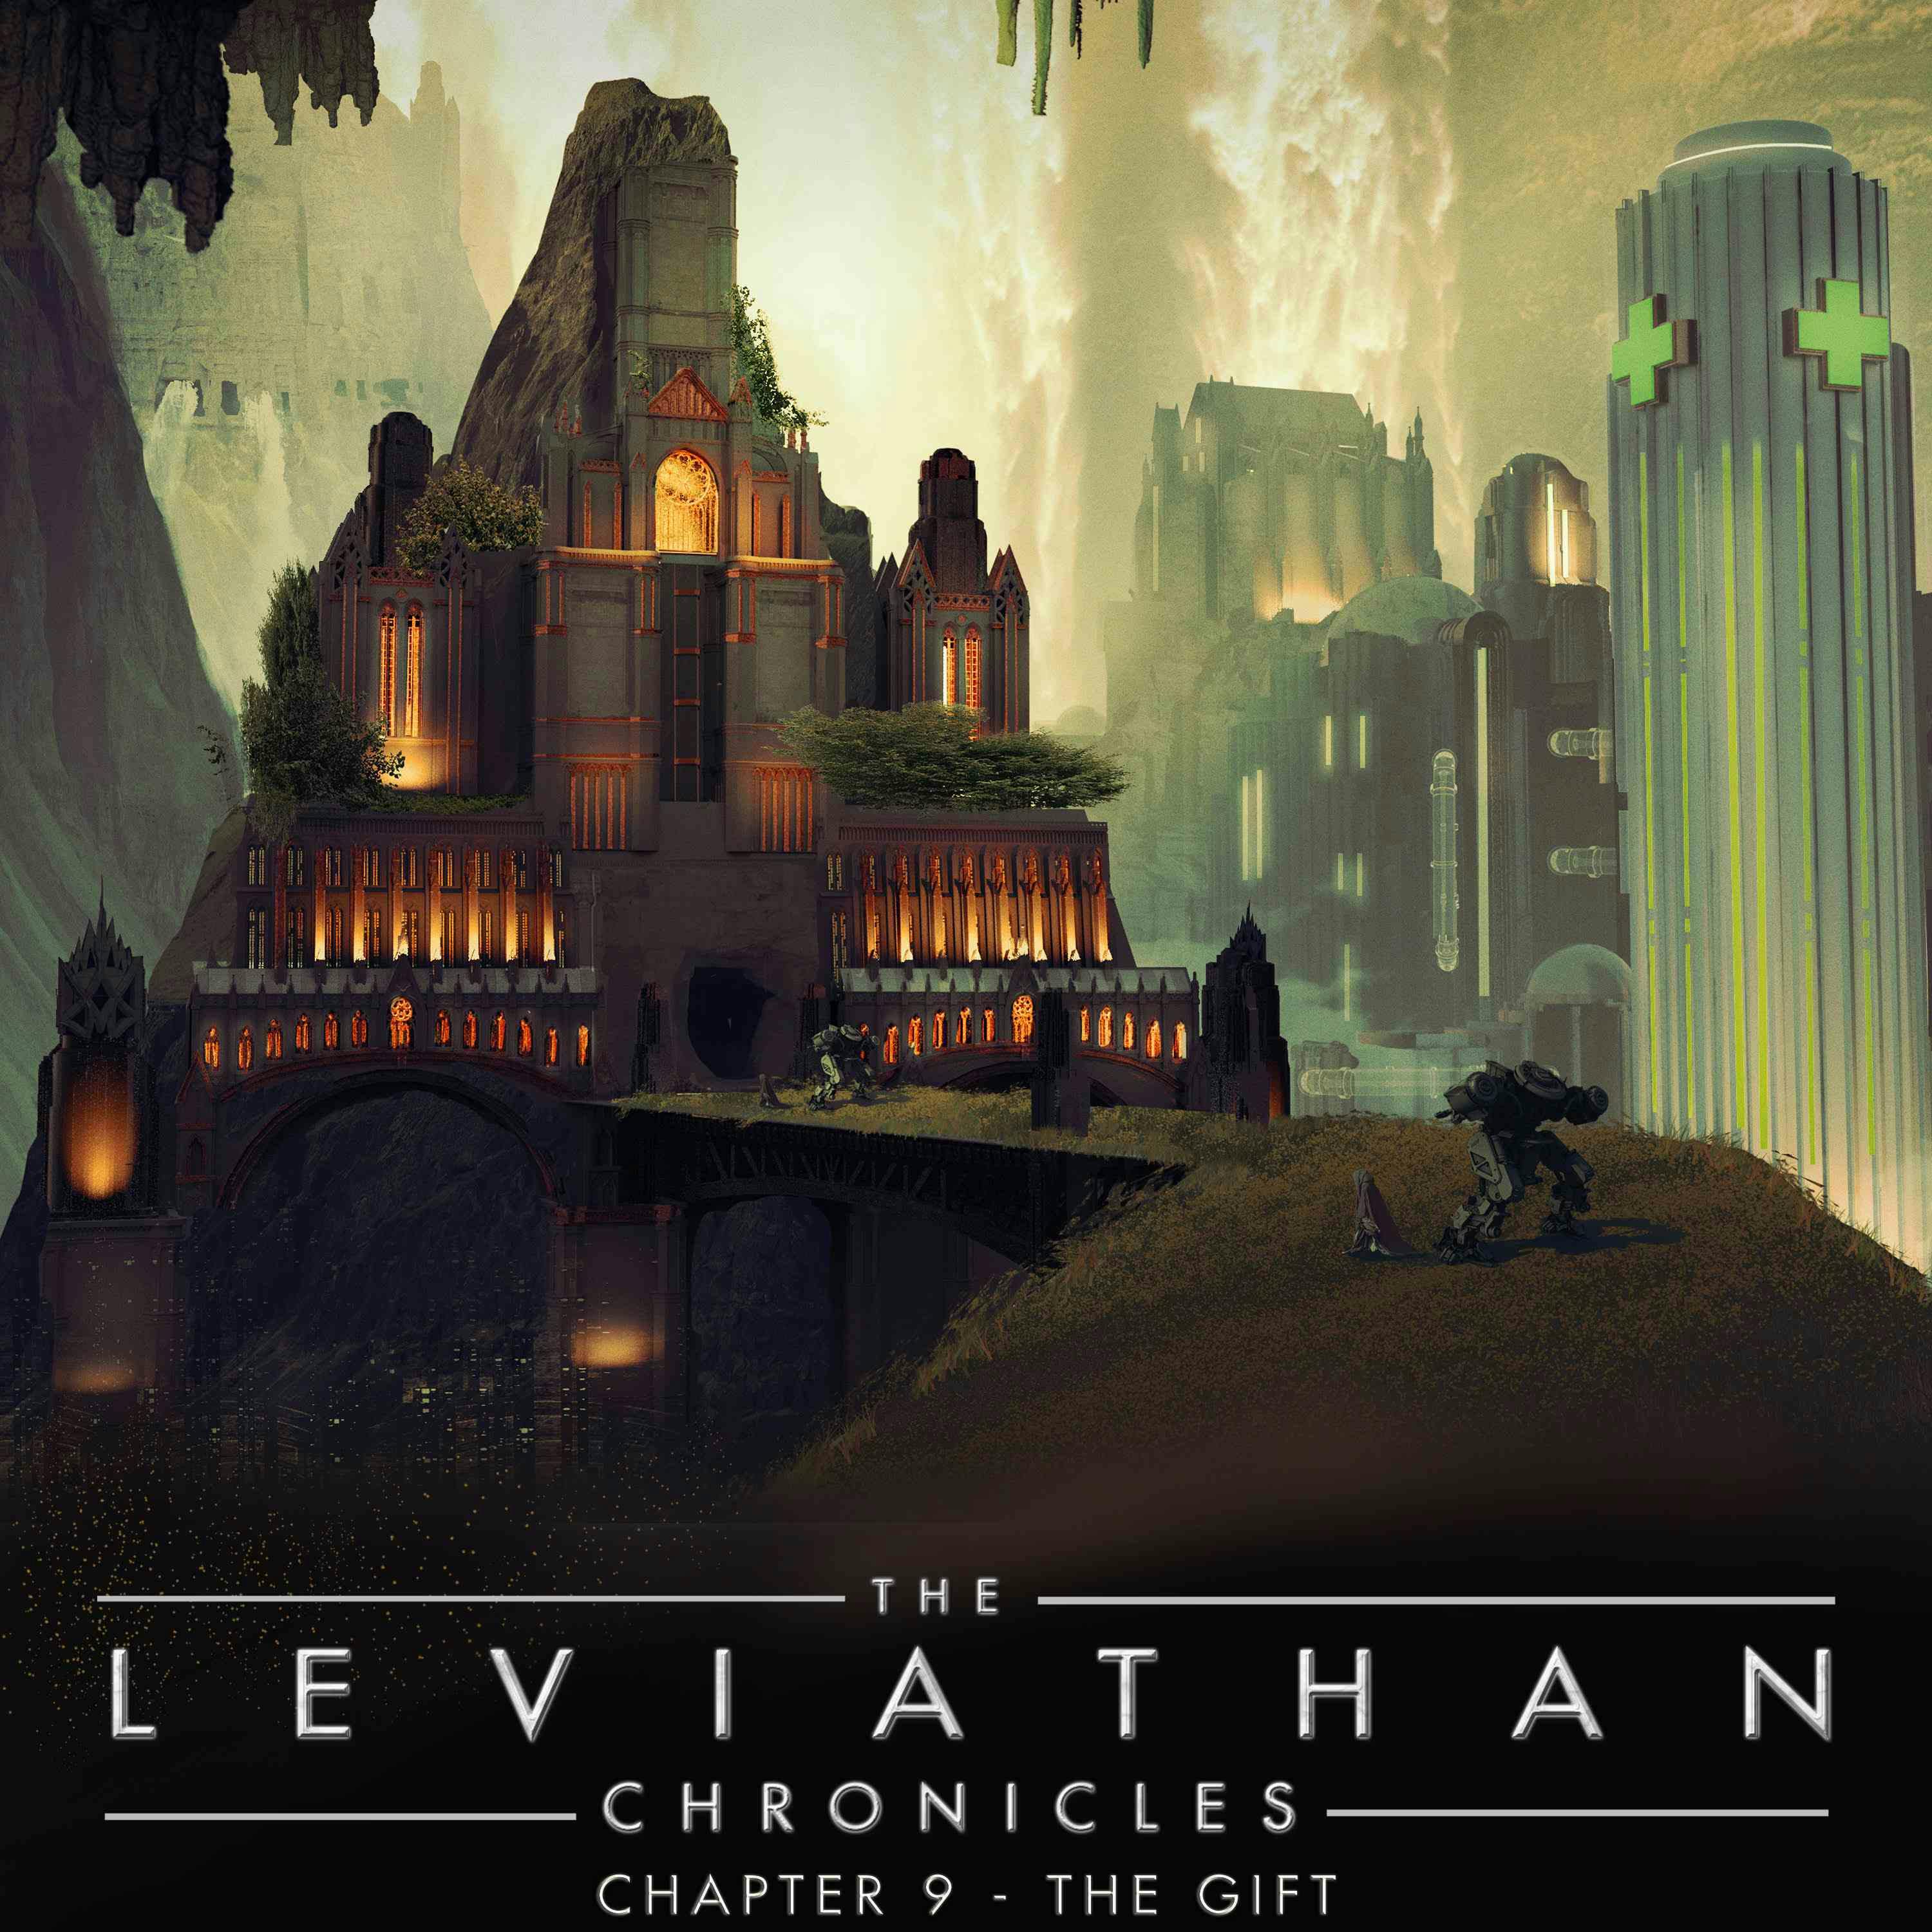 The Leviathan Chronicles | Chapter 9 - The Gift